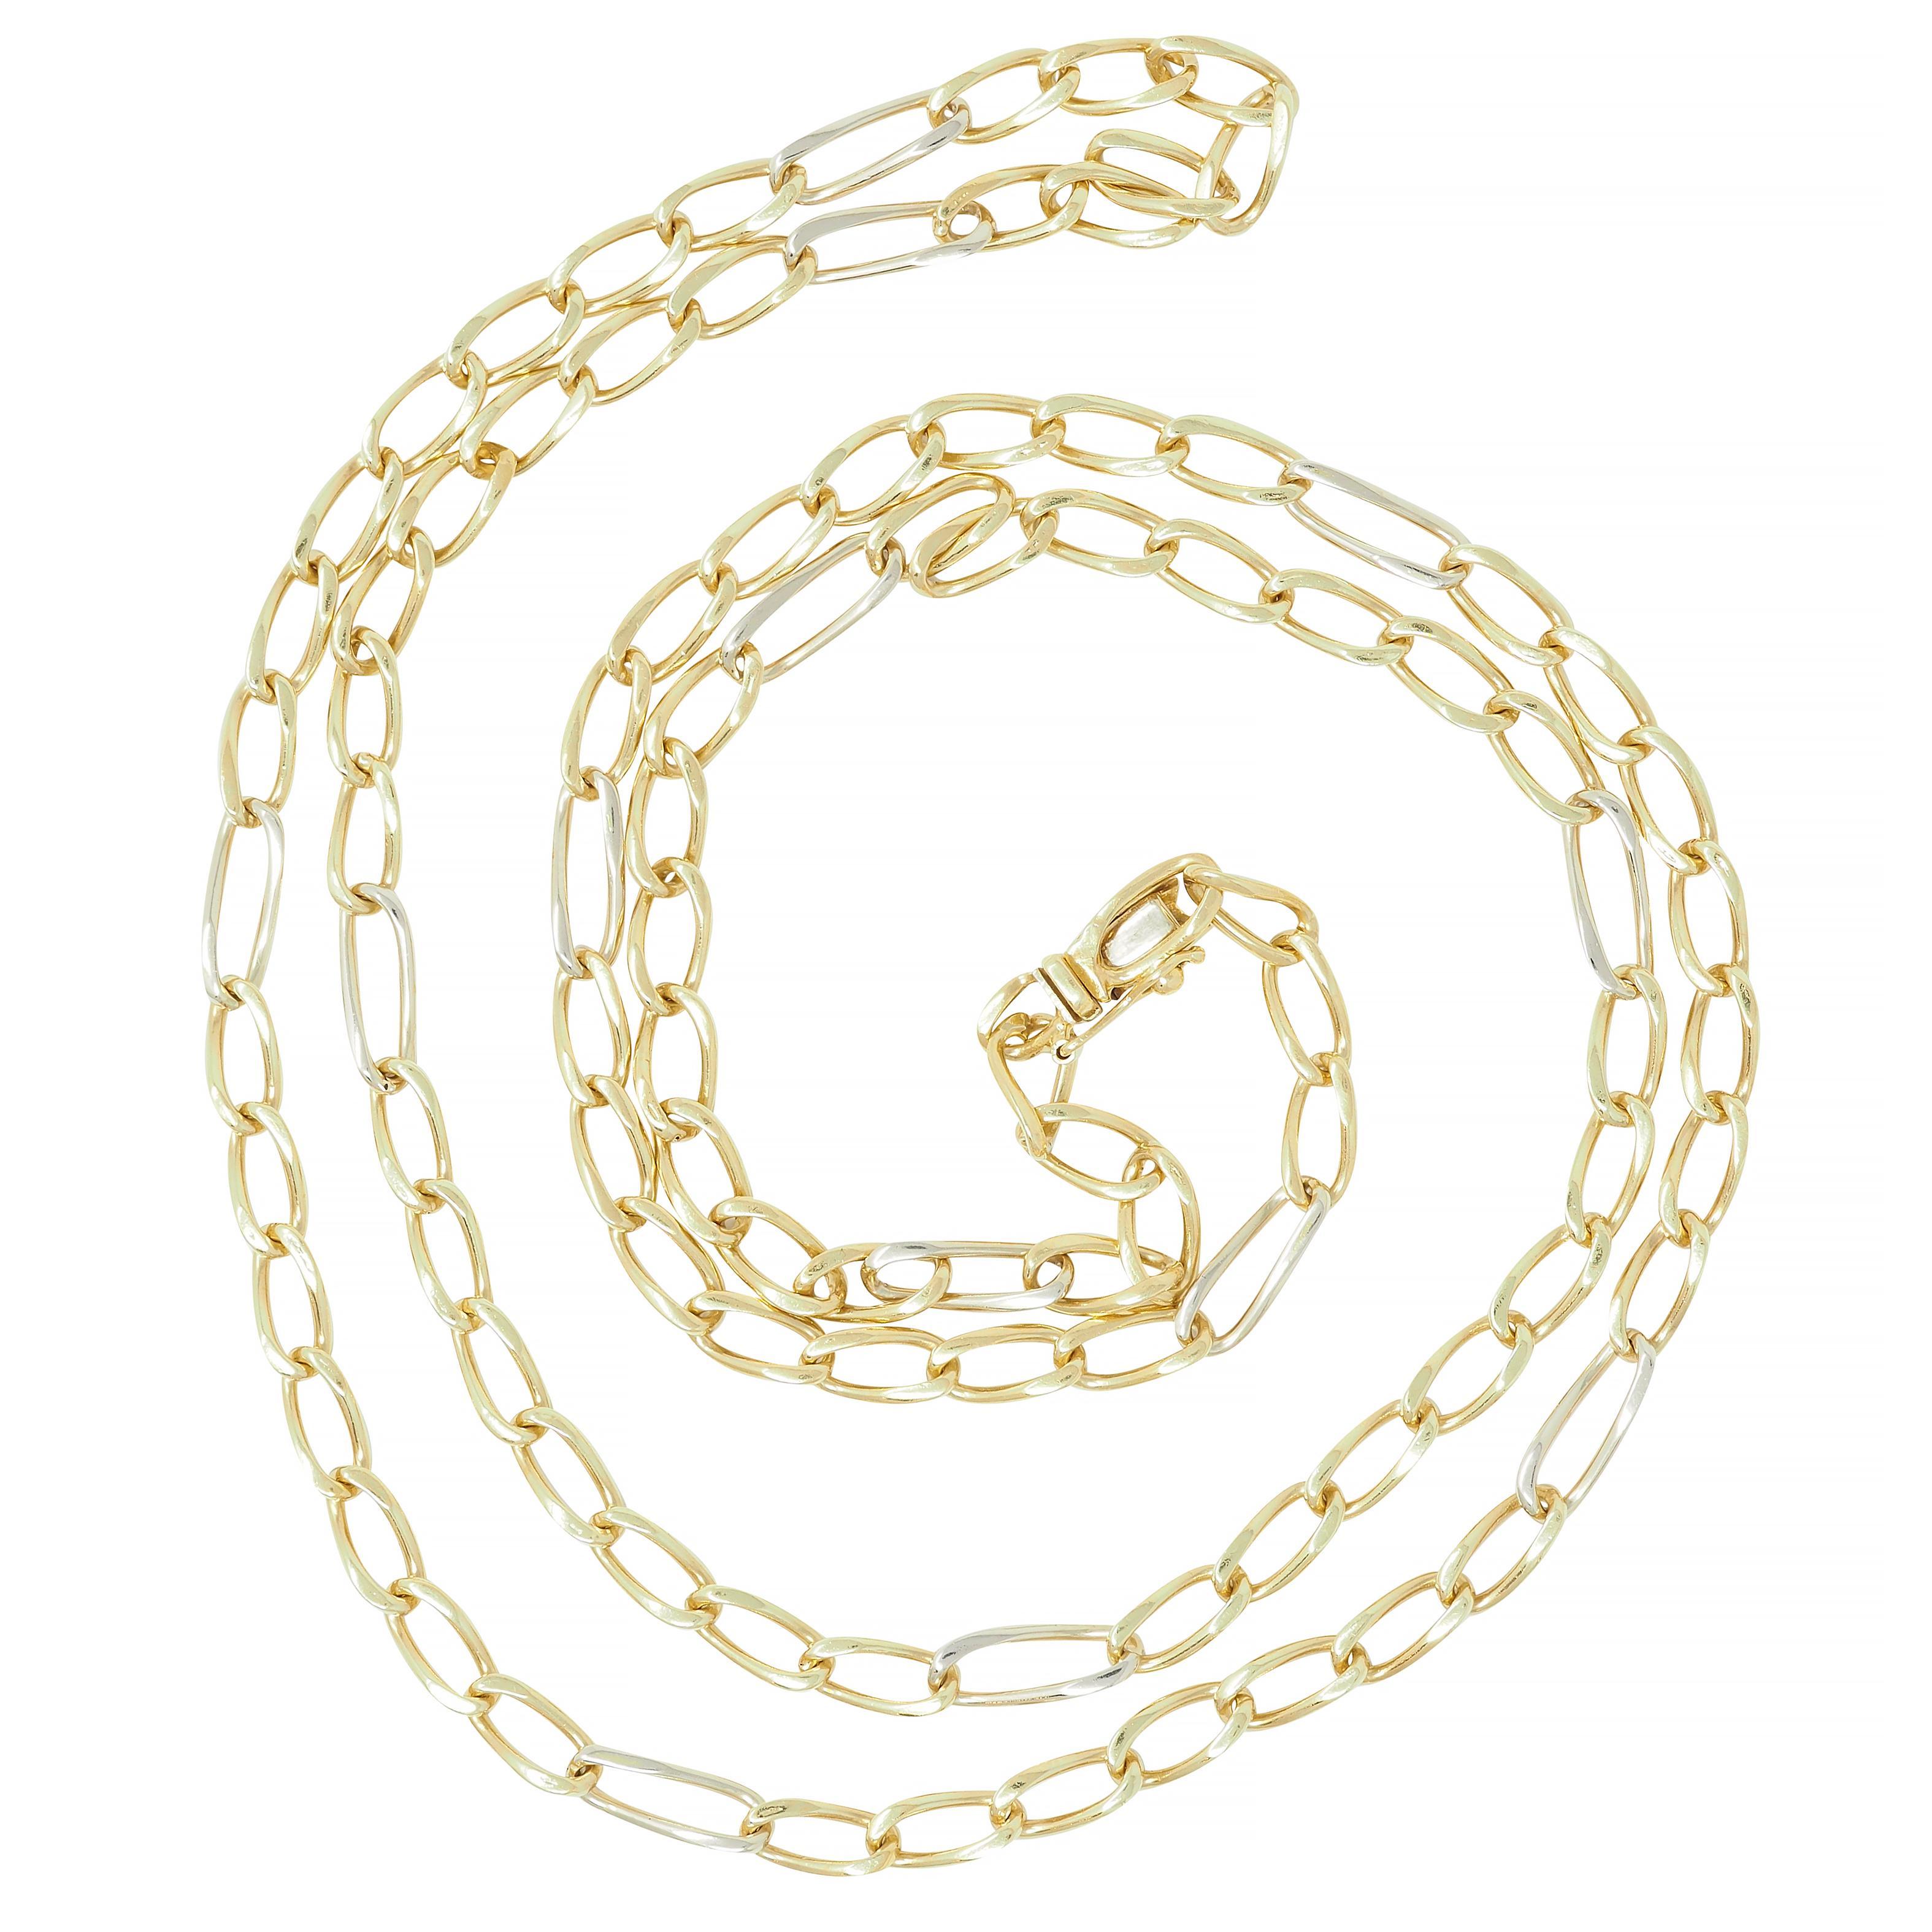 Comprised of yellow gold oval shaped twisted link chain 
Accented by white gold elongated link stations
Completed by press release clasp
With hinged figure eight safety 
Stamped for 18 karat gold 
Fully signed for Bvlgari
Circa: 1990s
Width at